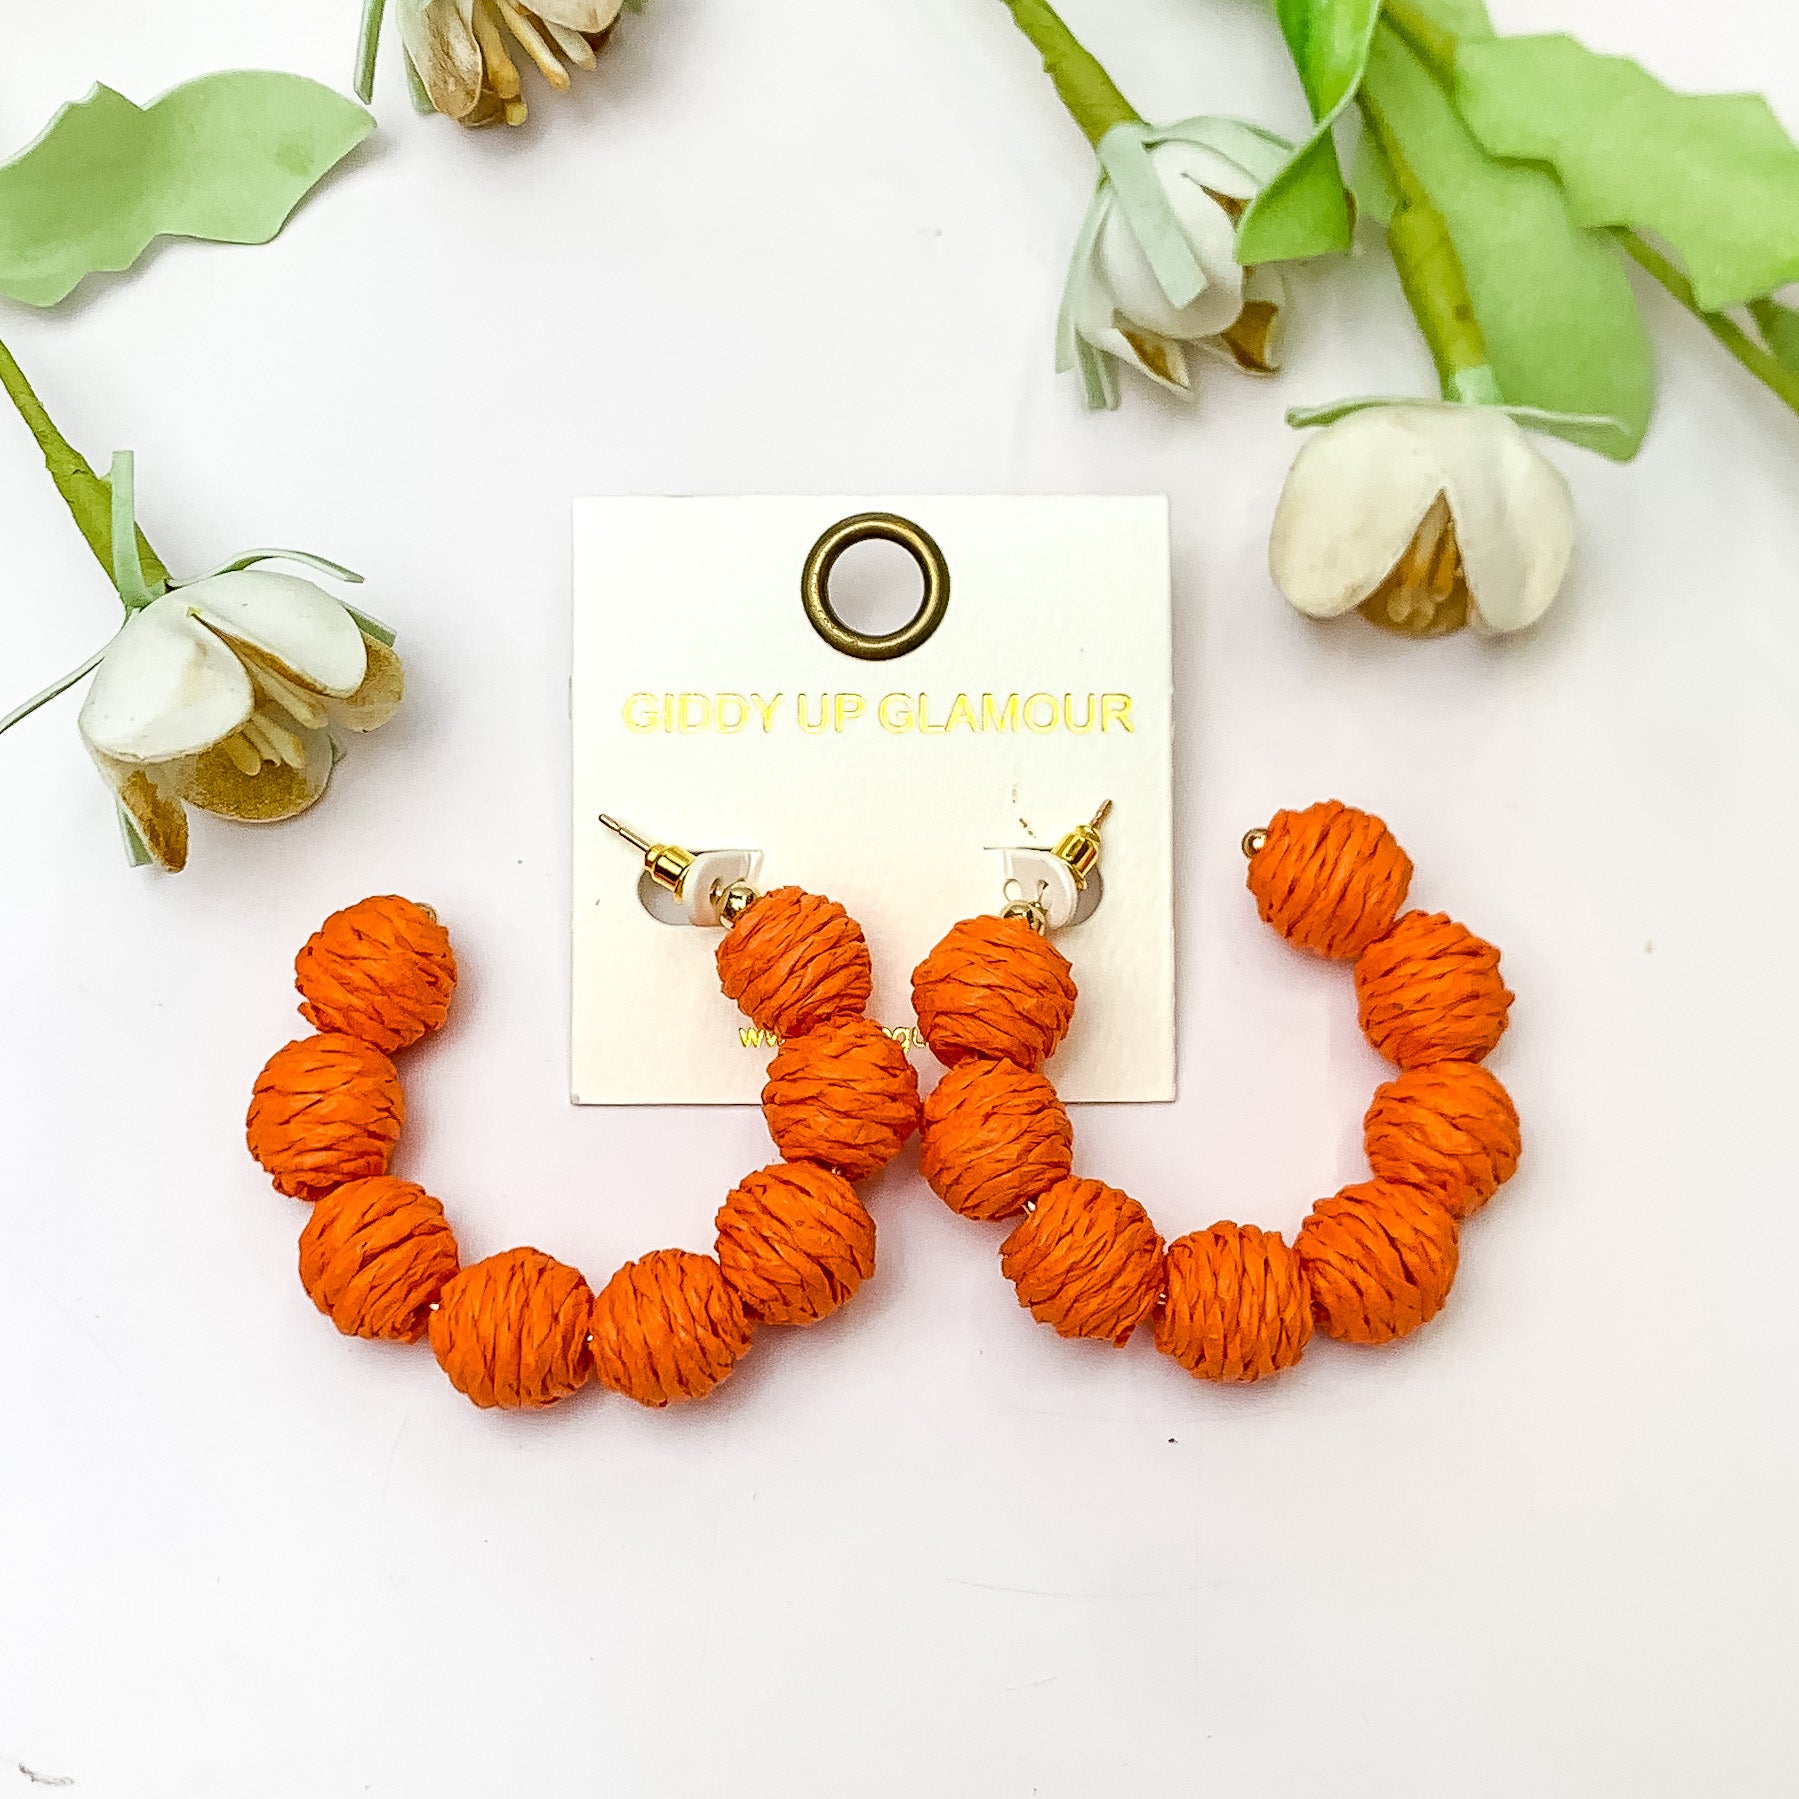 Sorbet Summer Raffia Ball Hoop Earrings in Orange. Pictured on a white background with flowers above the earrings. 